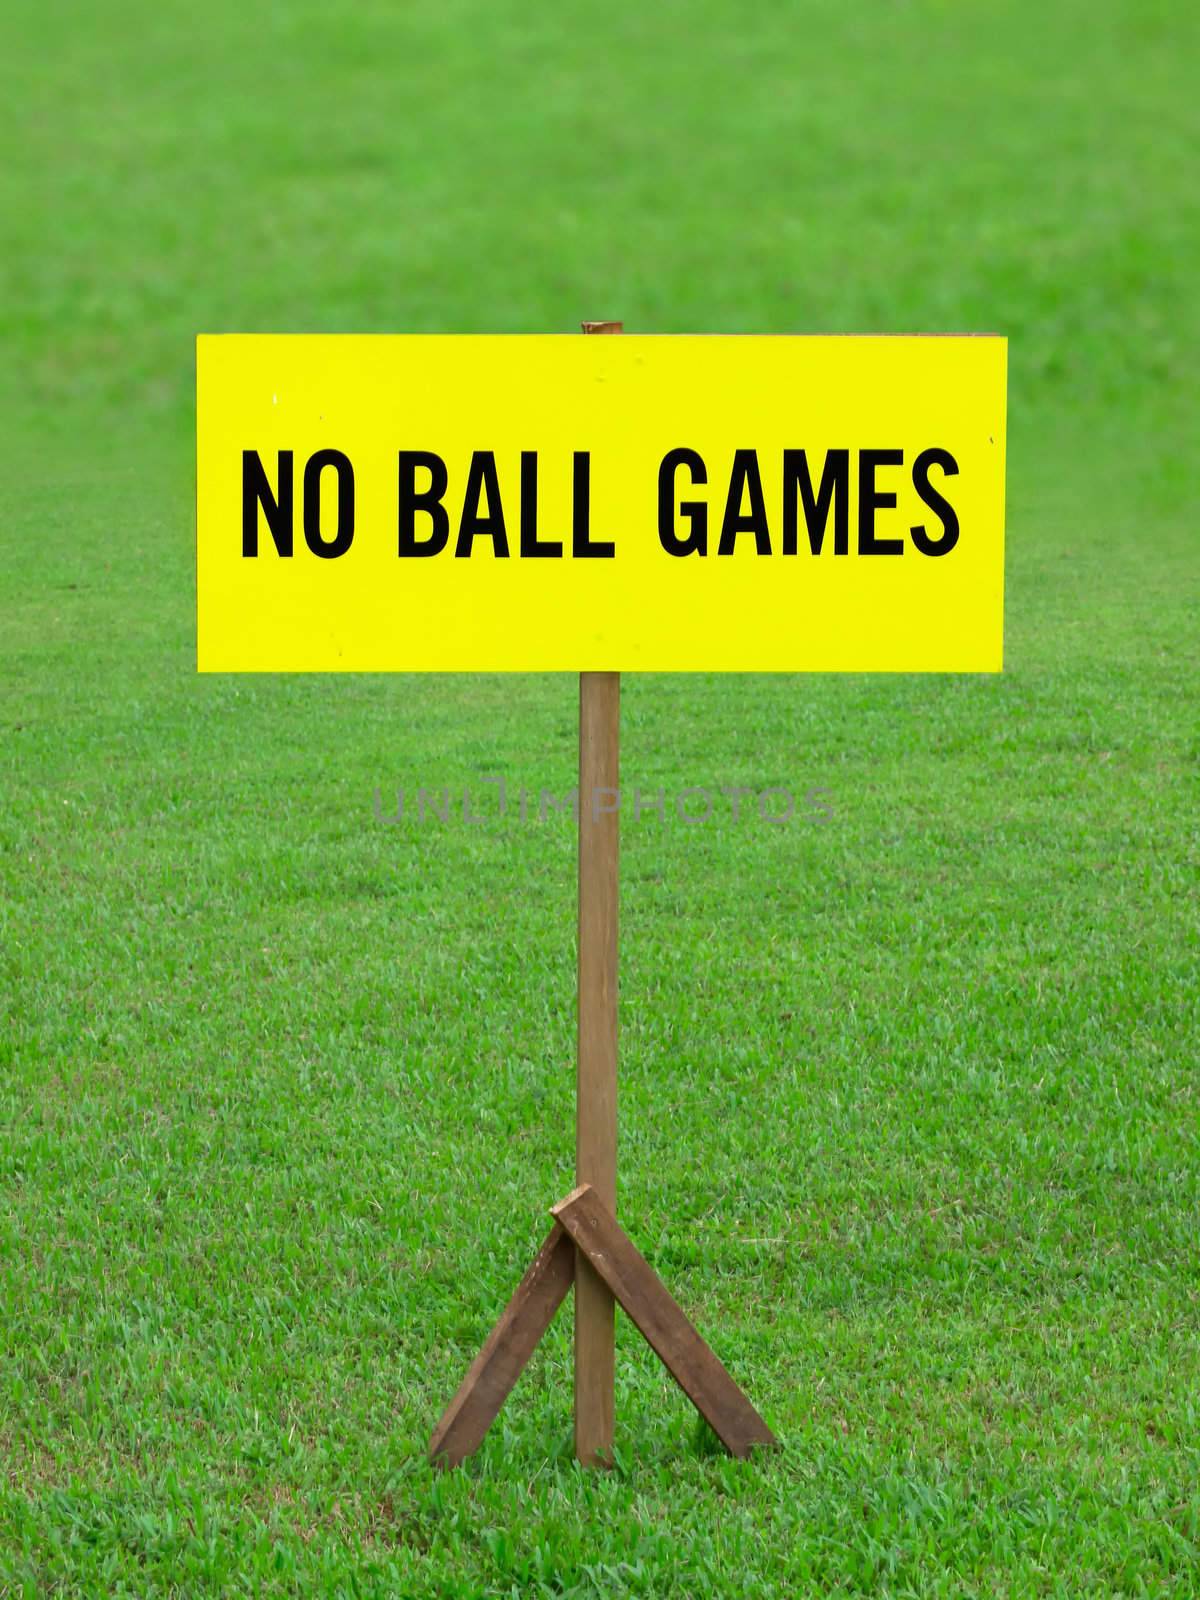 no ball games signboard by zkruger